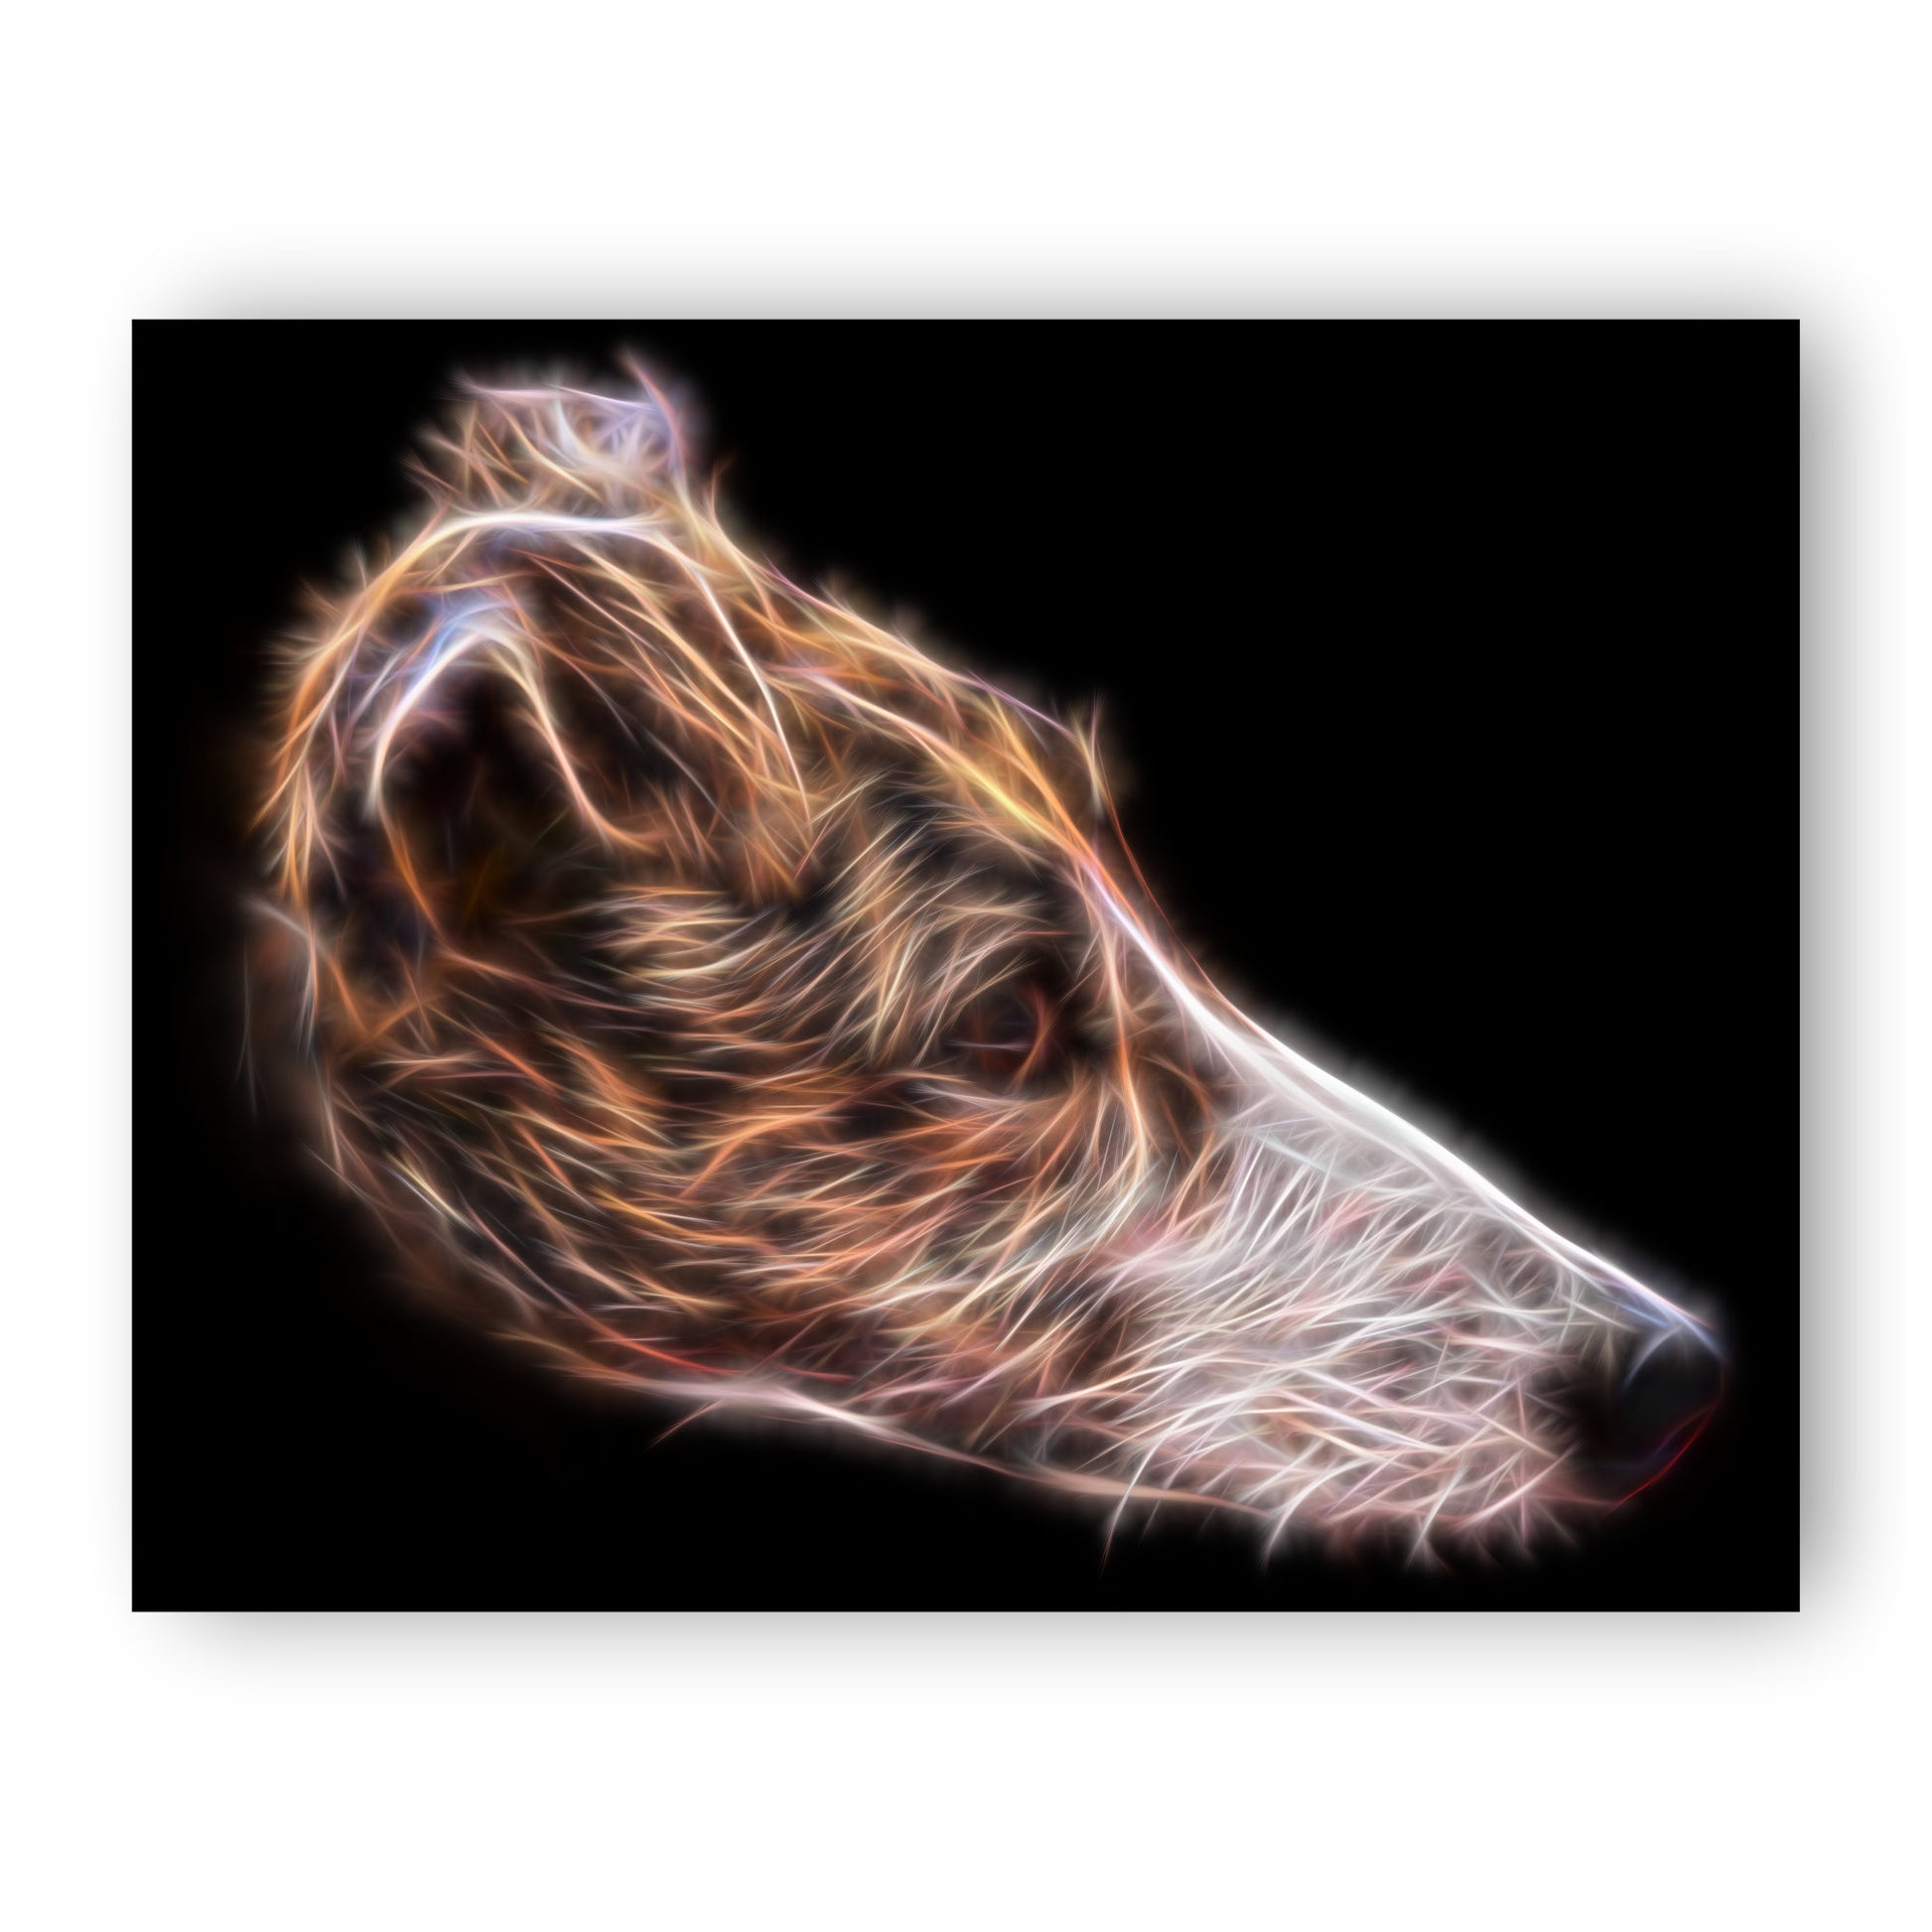 Brindle and White Greyhound Print with Stunning Fractal Art Design. Various Sizes Available